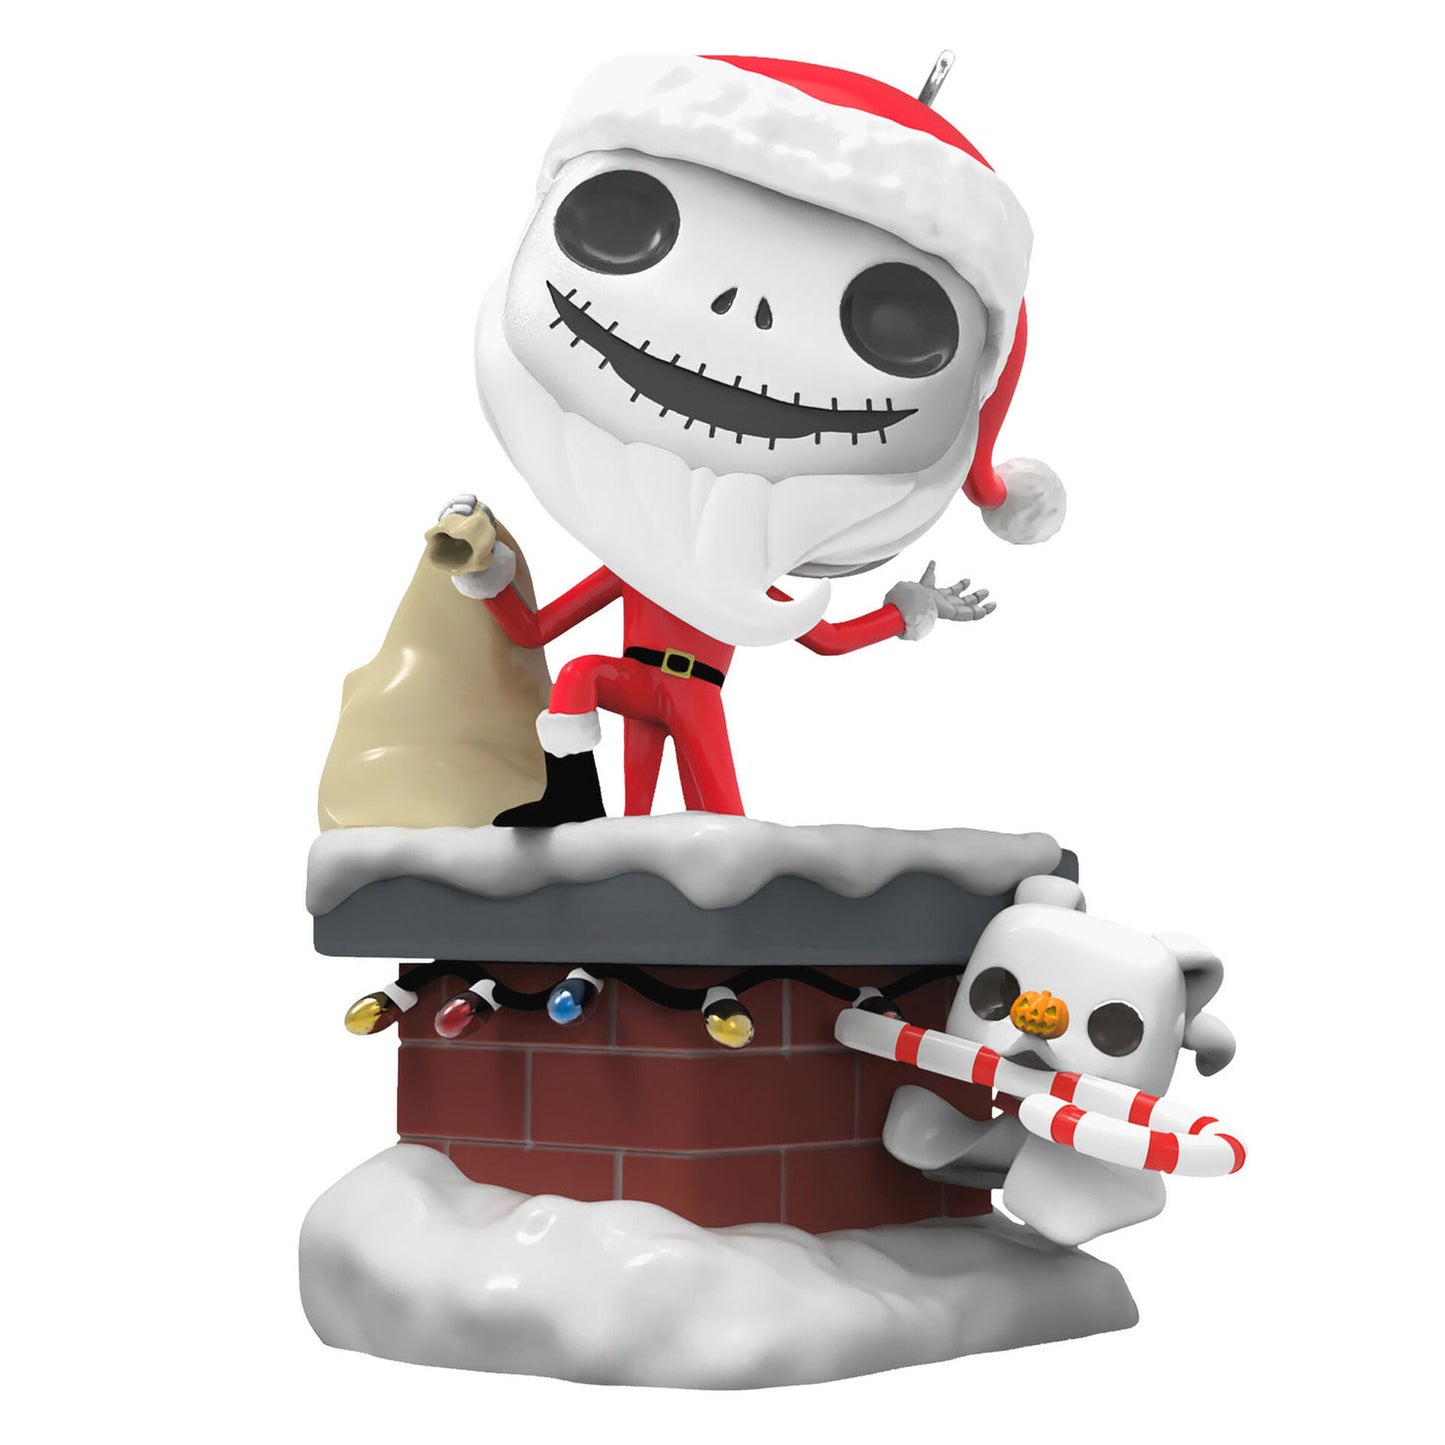 A Funko Pop Christmas ornament depicting Jack Skellington dressed as Santa and Zero holding a candy cane perched on a snowy chimney that is decorated with lights.